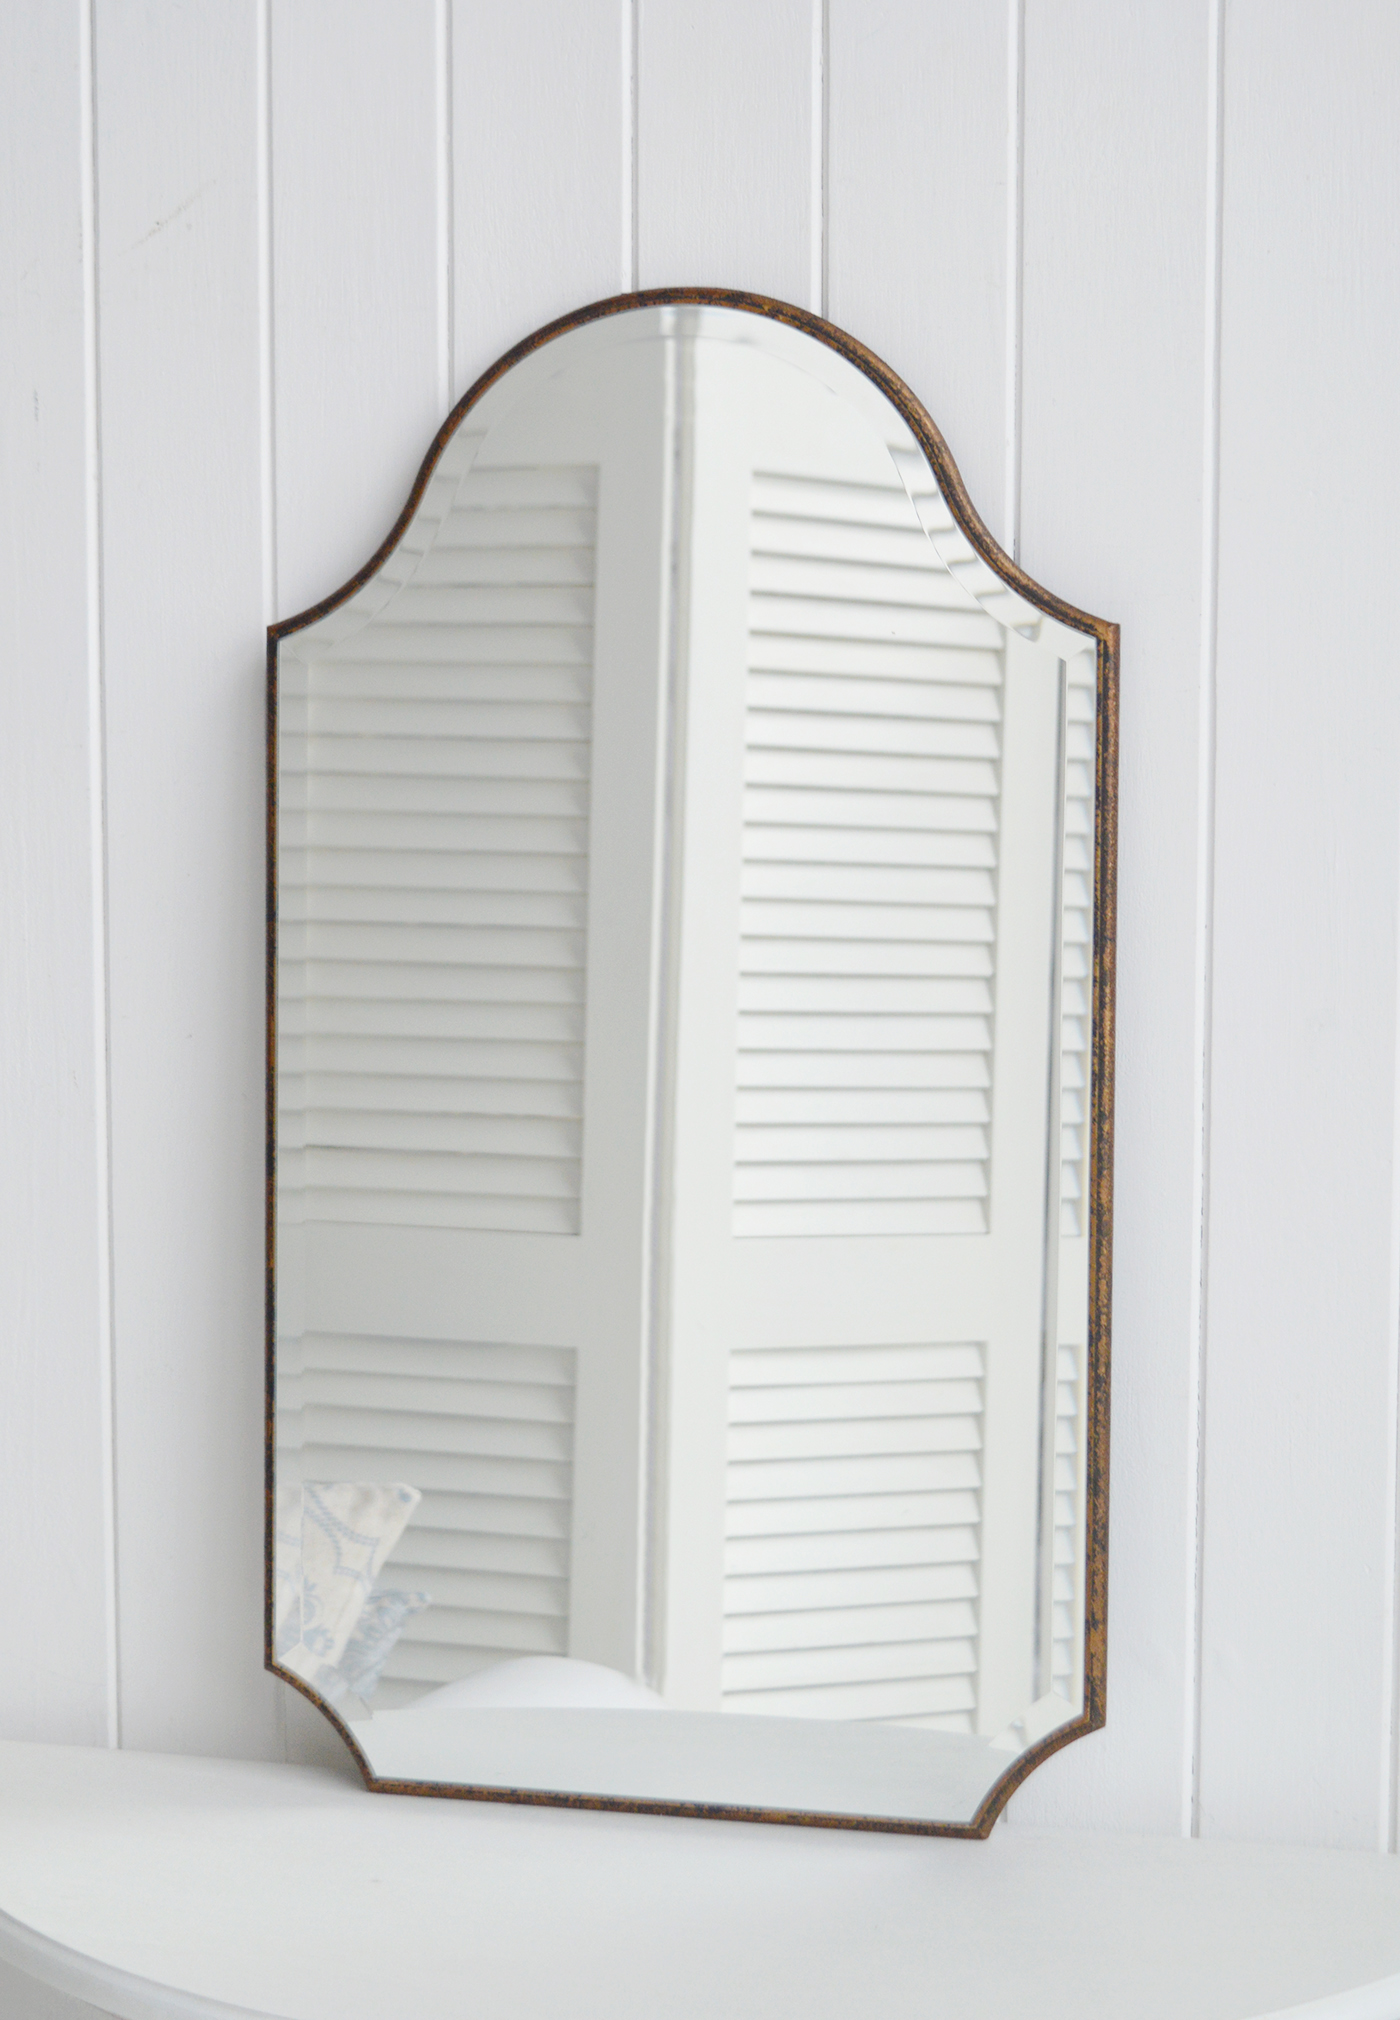 Waterbury shaped wall mirror for New England inspired modern farmhouse, coastal and country home interiors